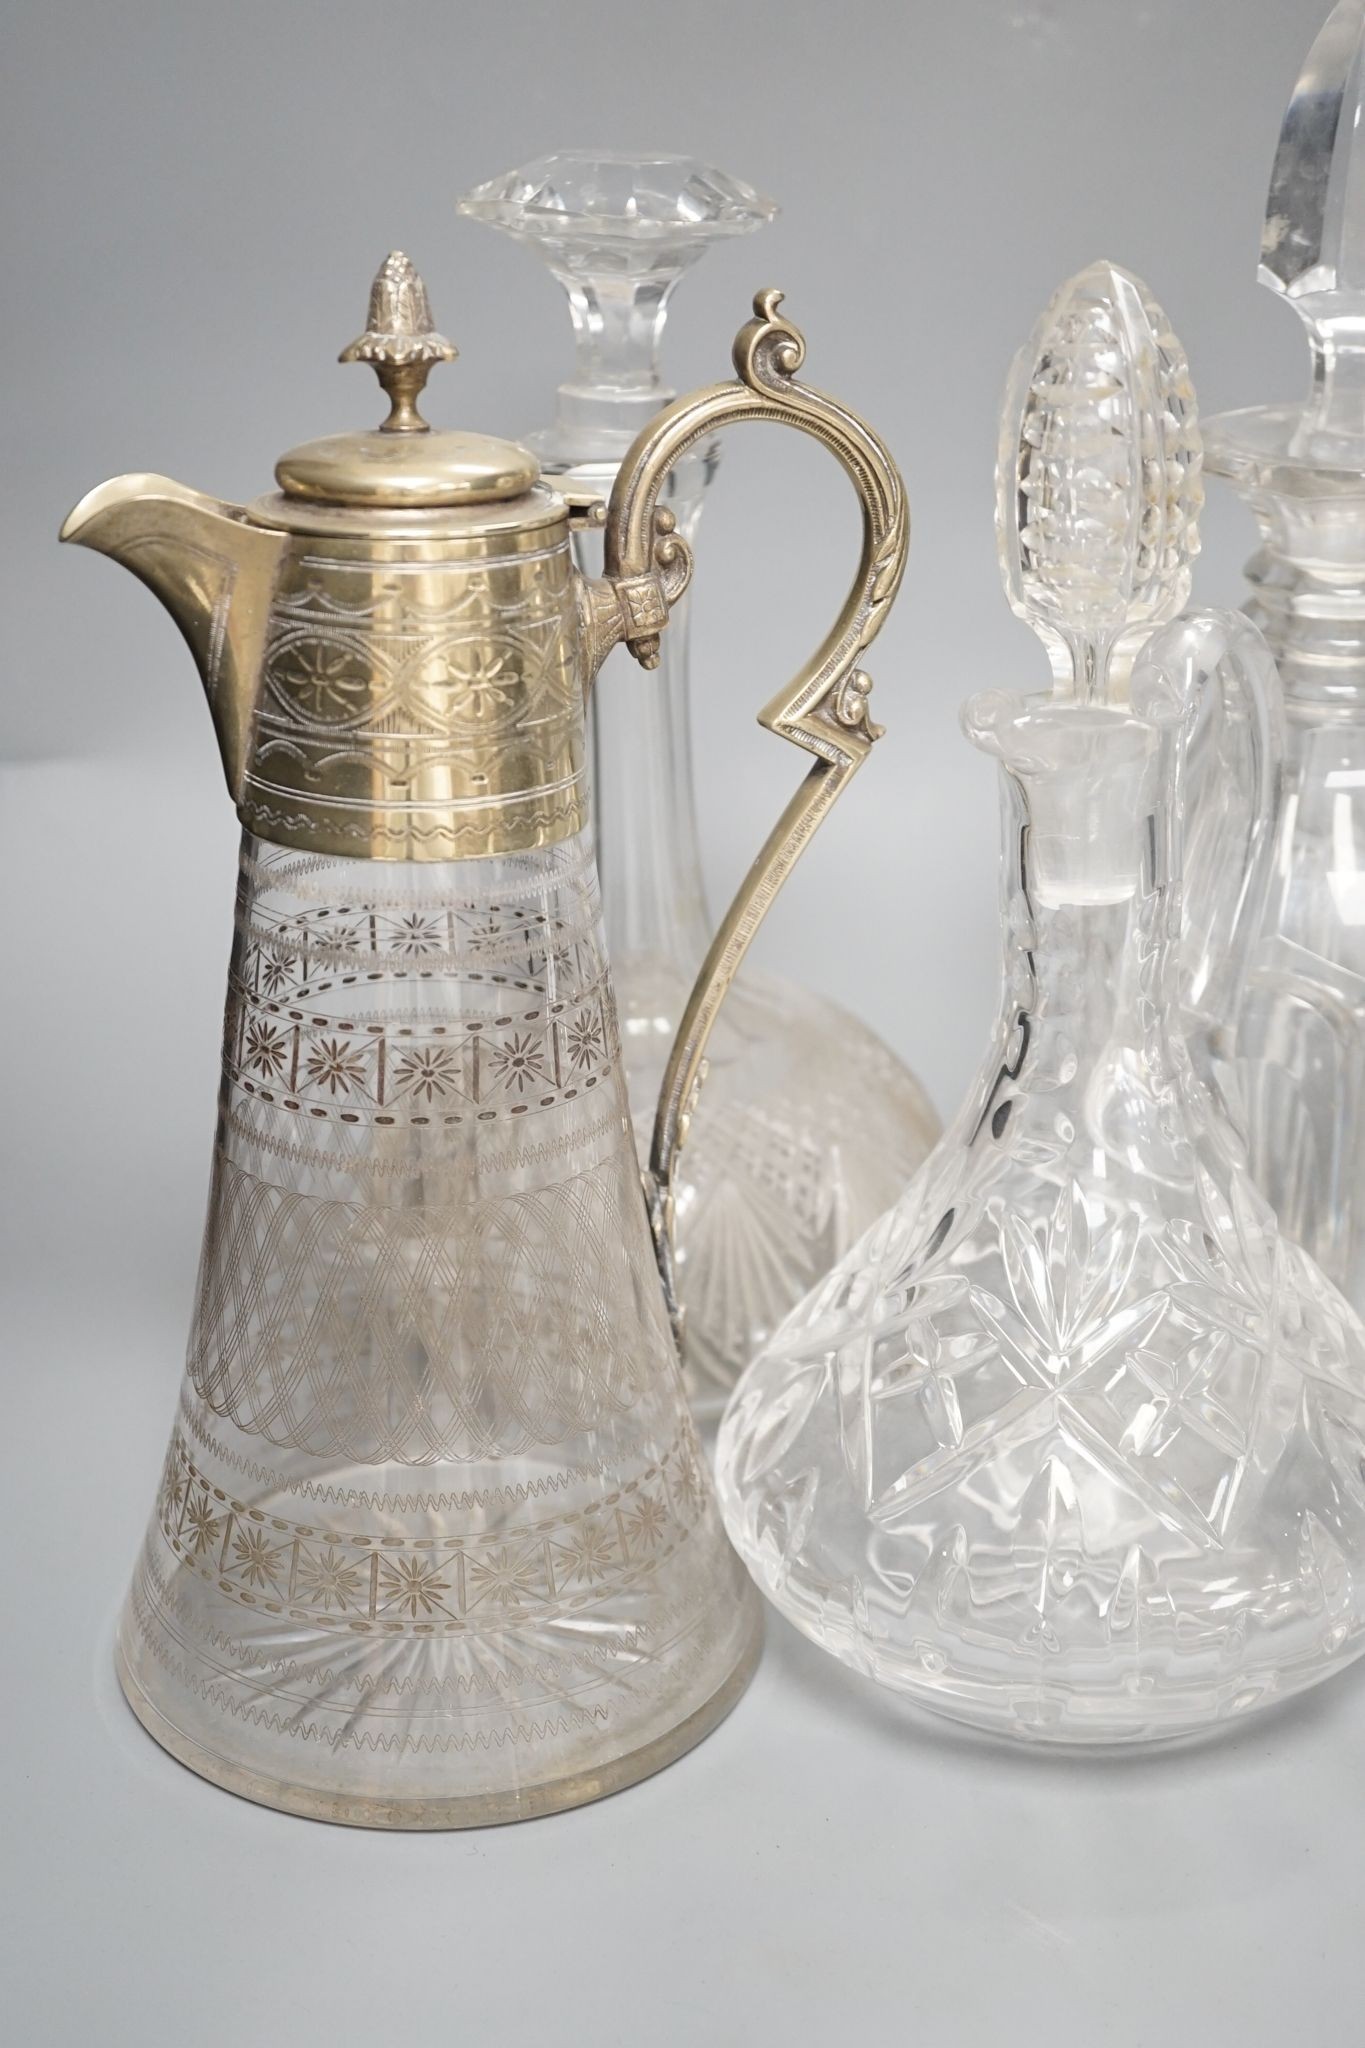 A Hukin and Heath claret jug and other decanters etc.